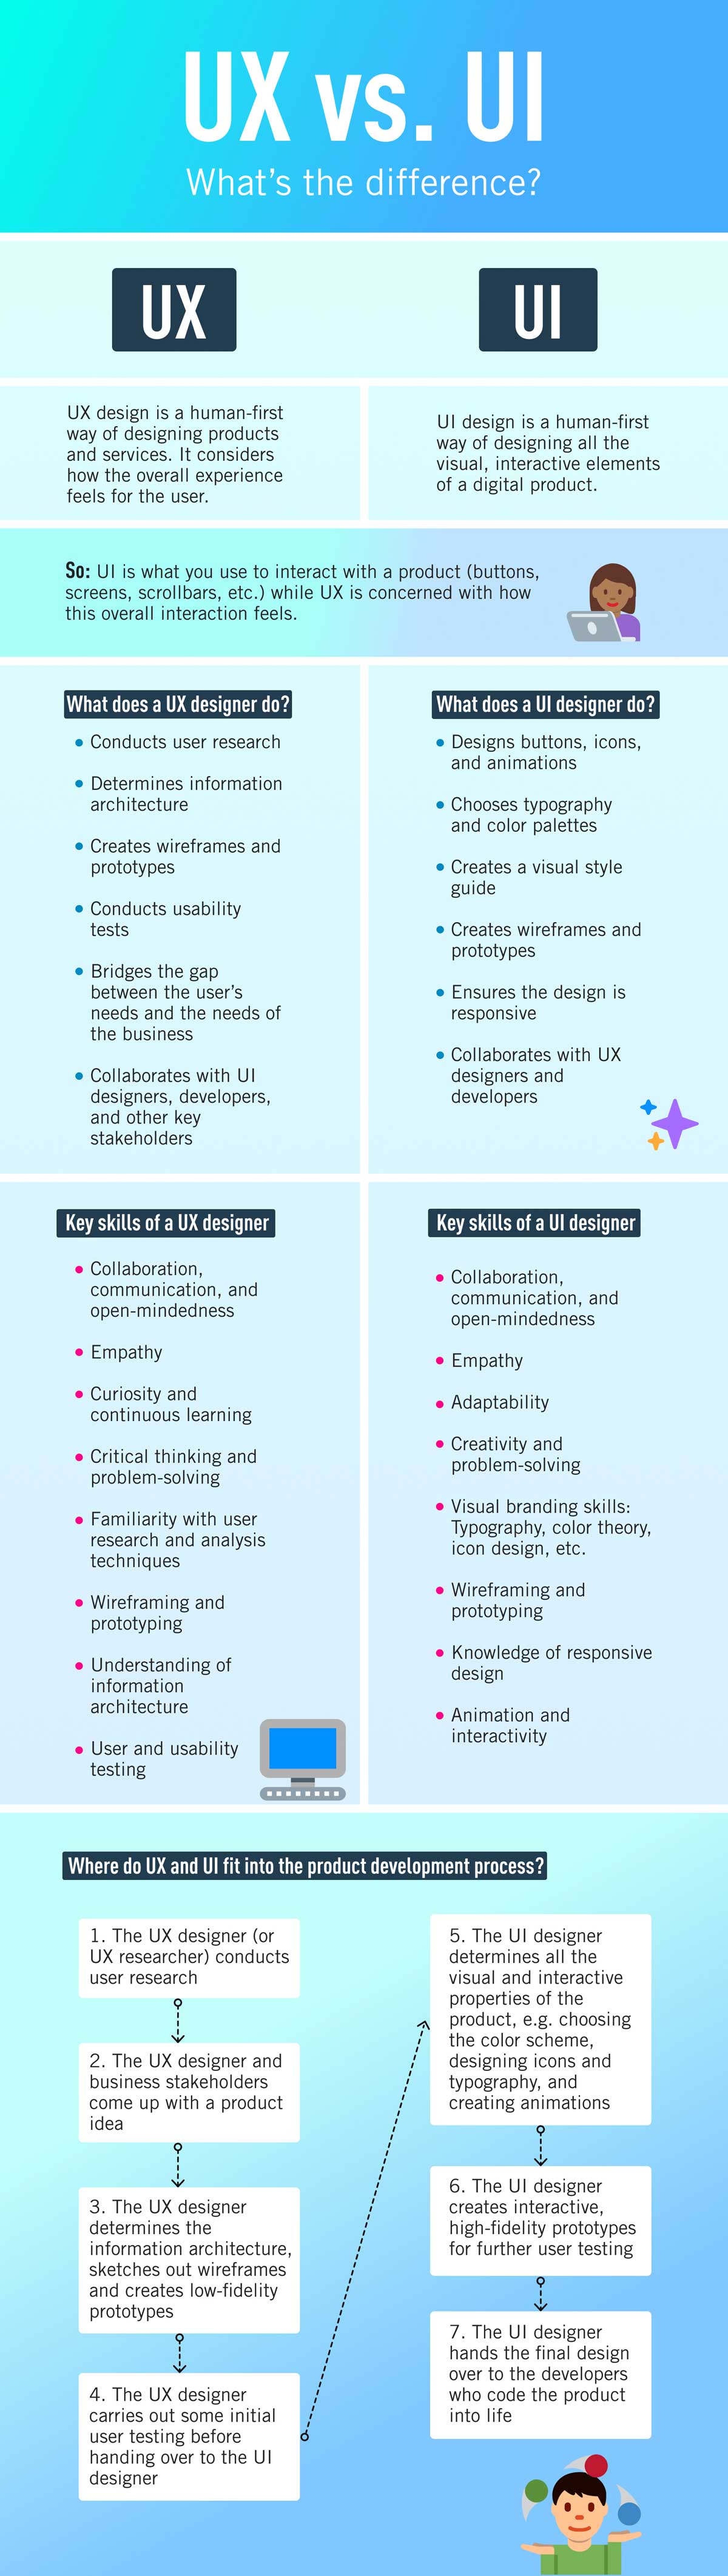 A full-page infographic listing the differences between UX and UI design in terms of tasks, skills, and where UI/UX fit into the overall product design process